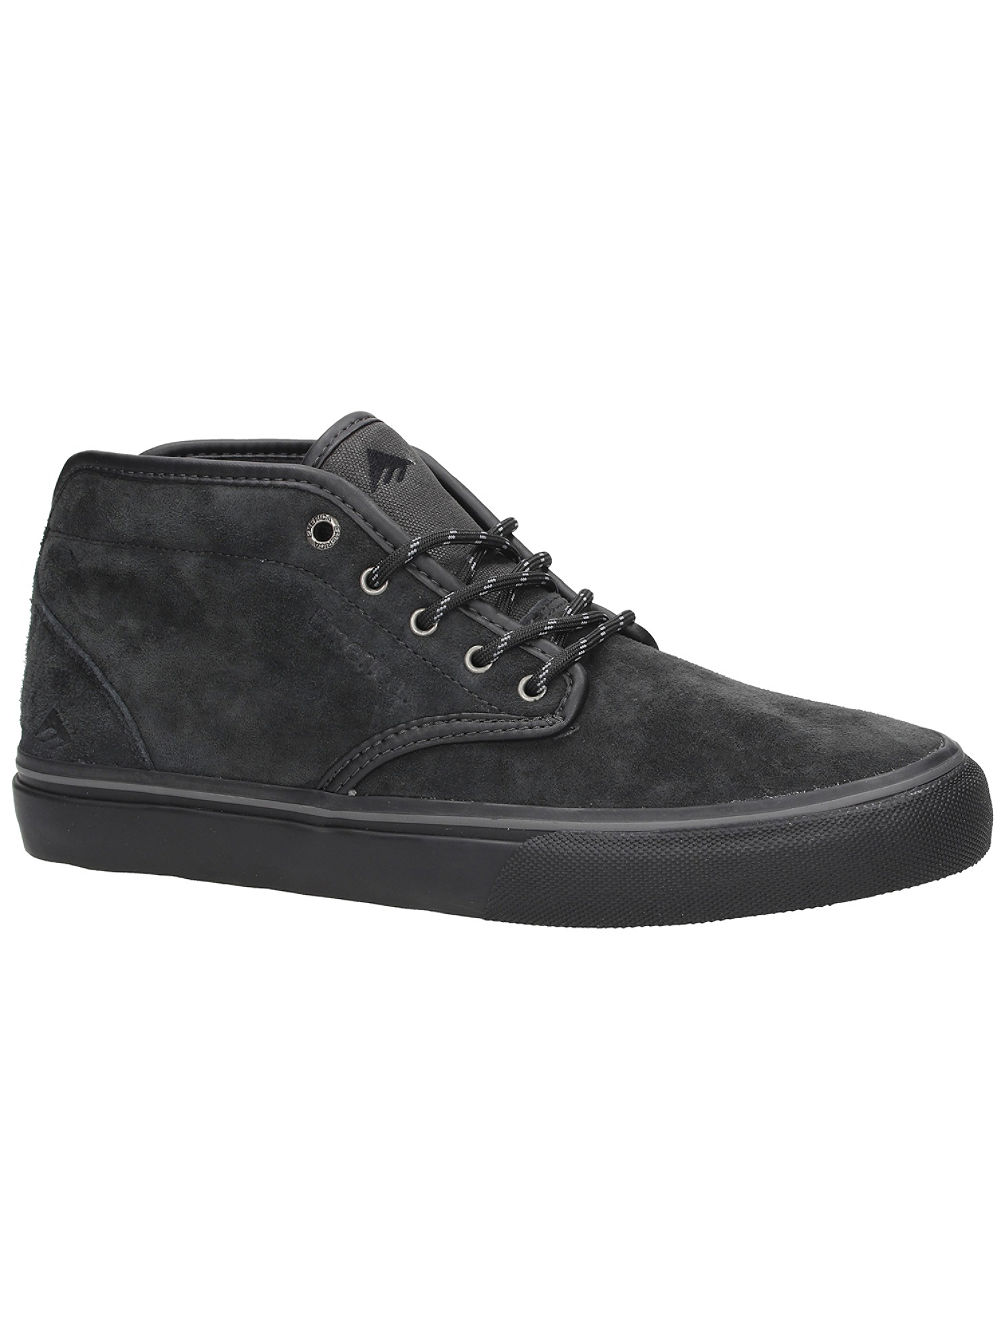 Wino G6 Mid Chaussures de Skate